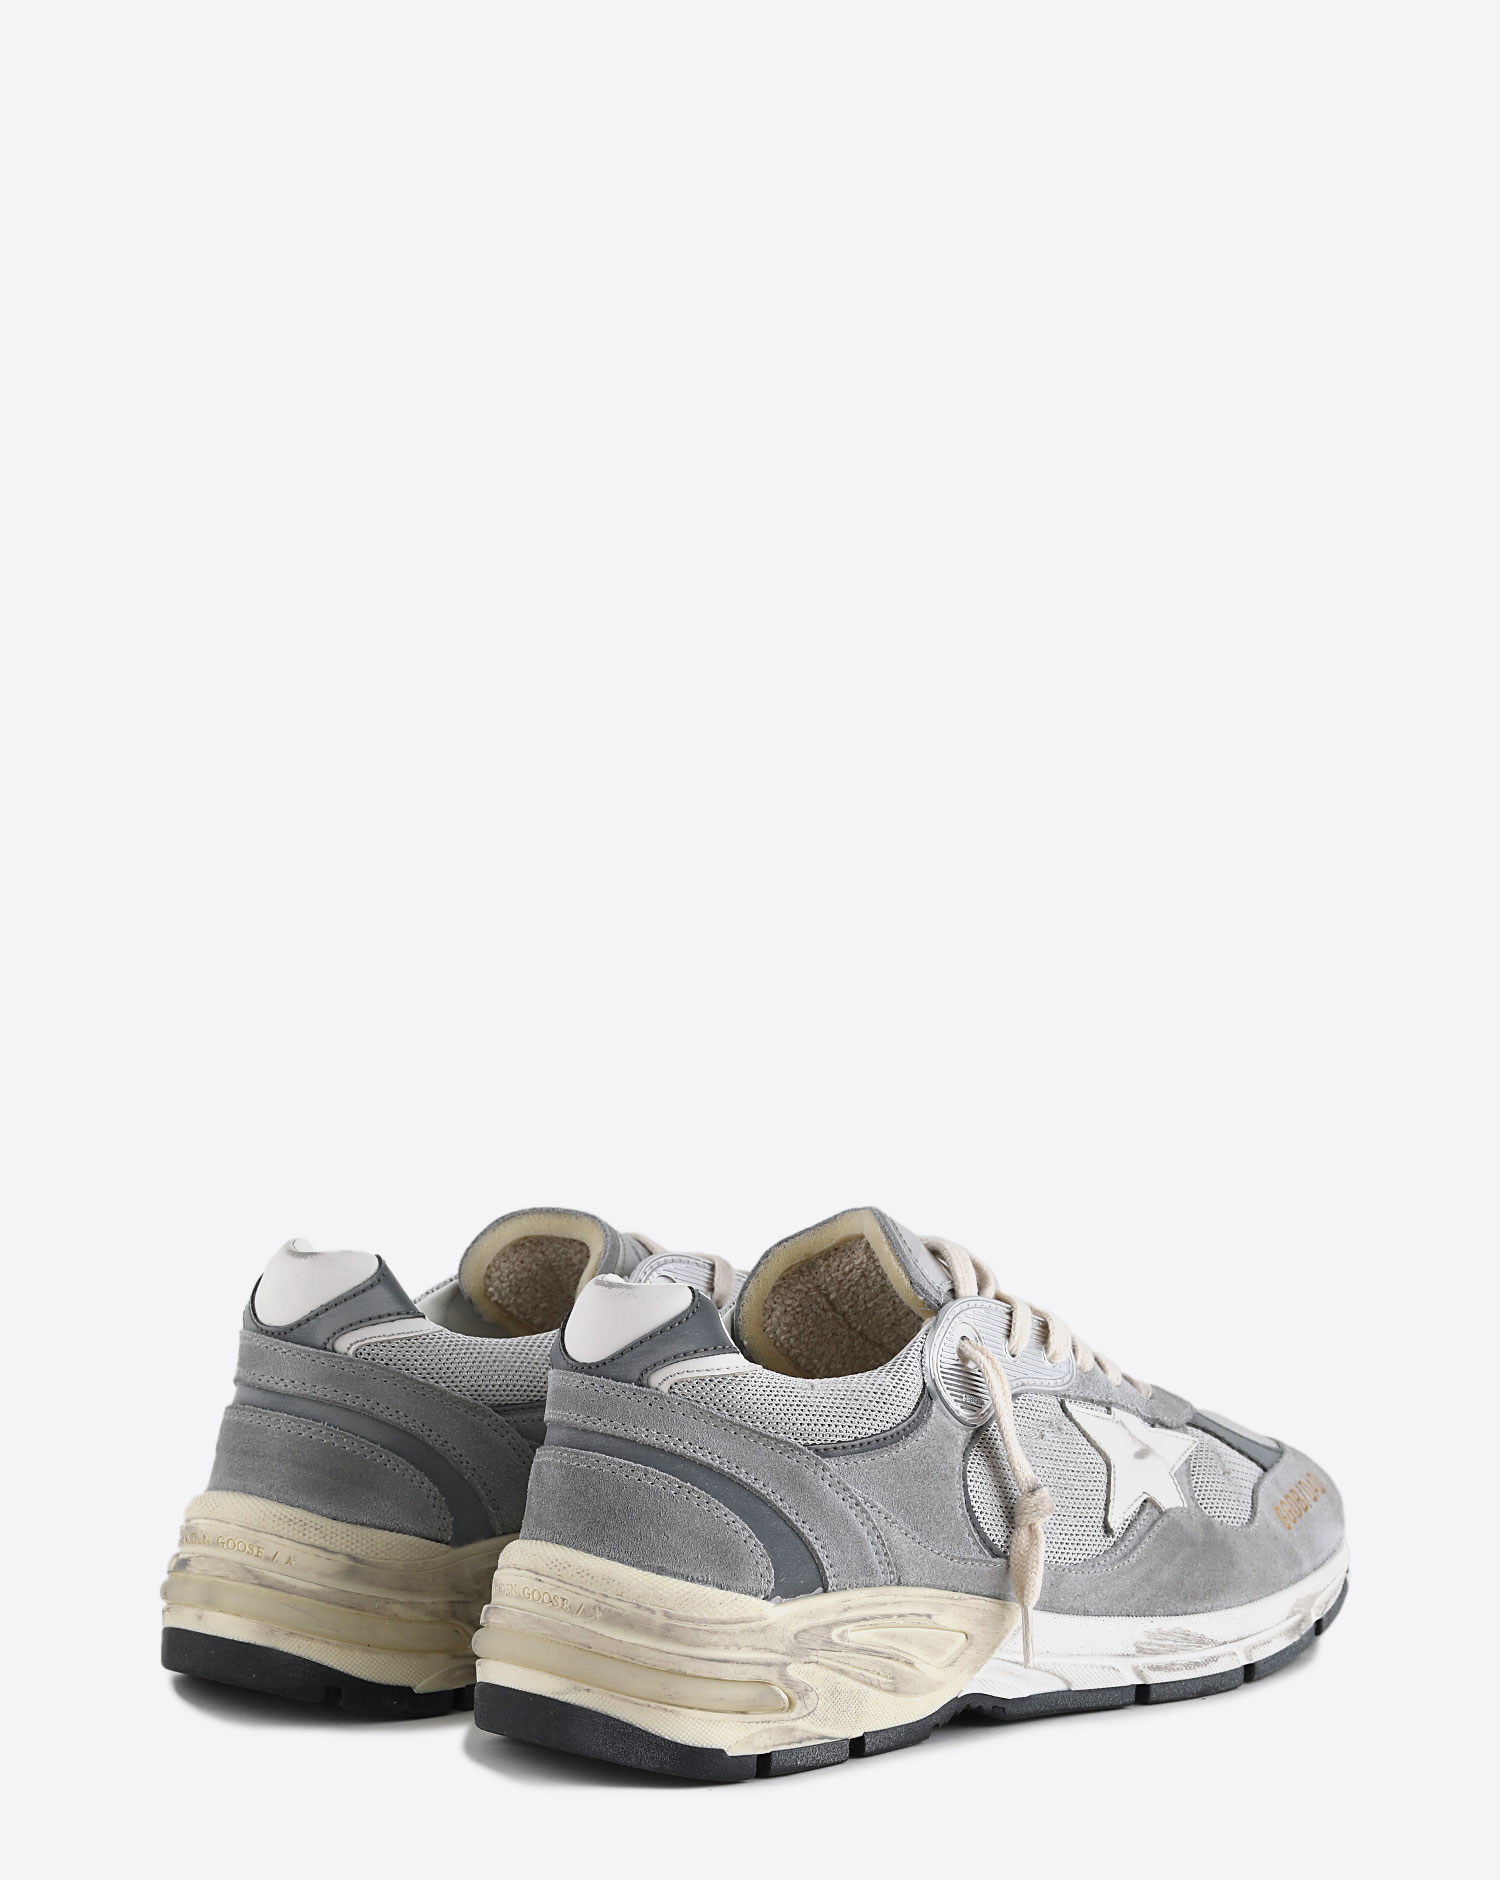 Sneakers Running Dad grise étoile blanche 60379 Golden Goose femme. Dos.